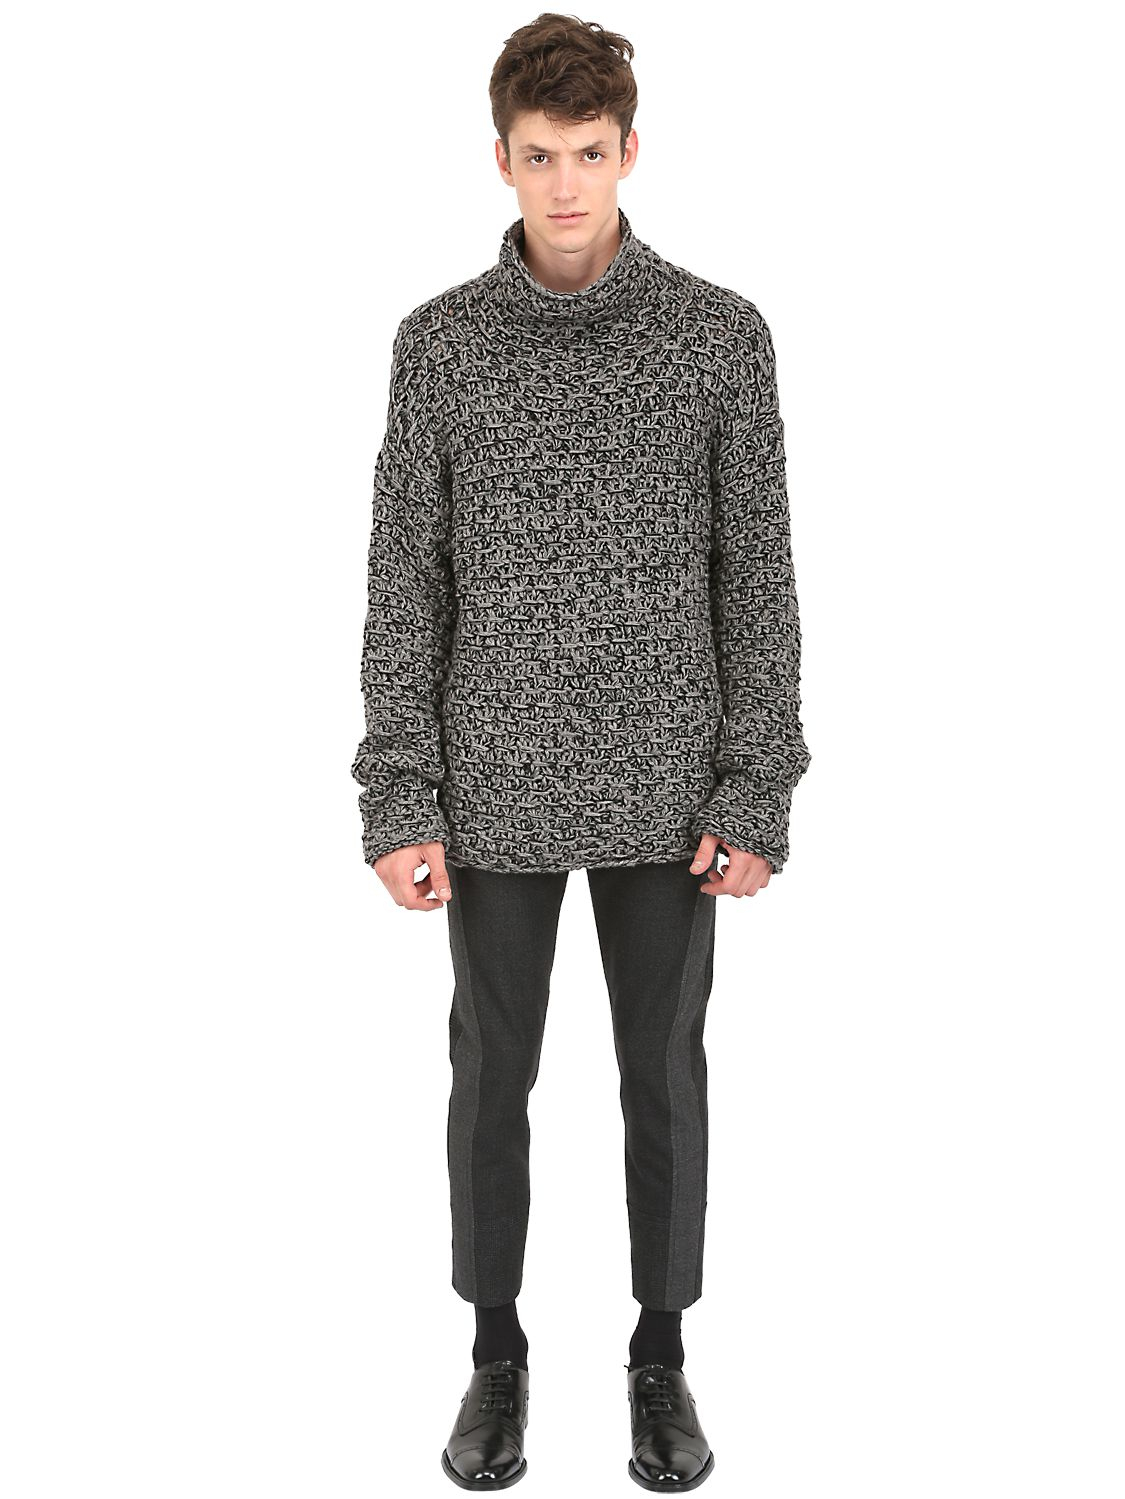 Lyst - Dolce & Gabbana Oversized Wool Cashmere Sweater in Black for Men